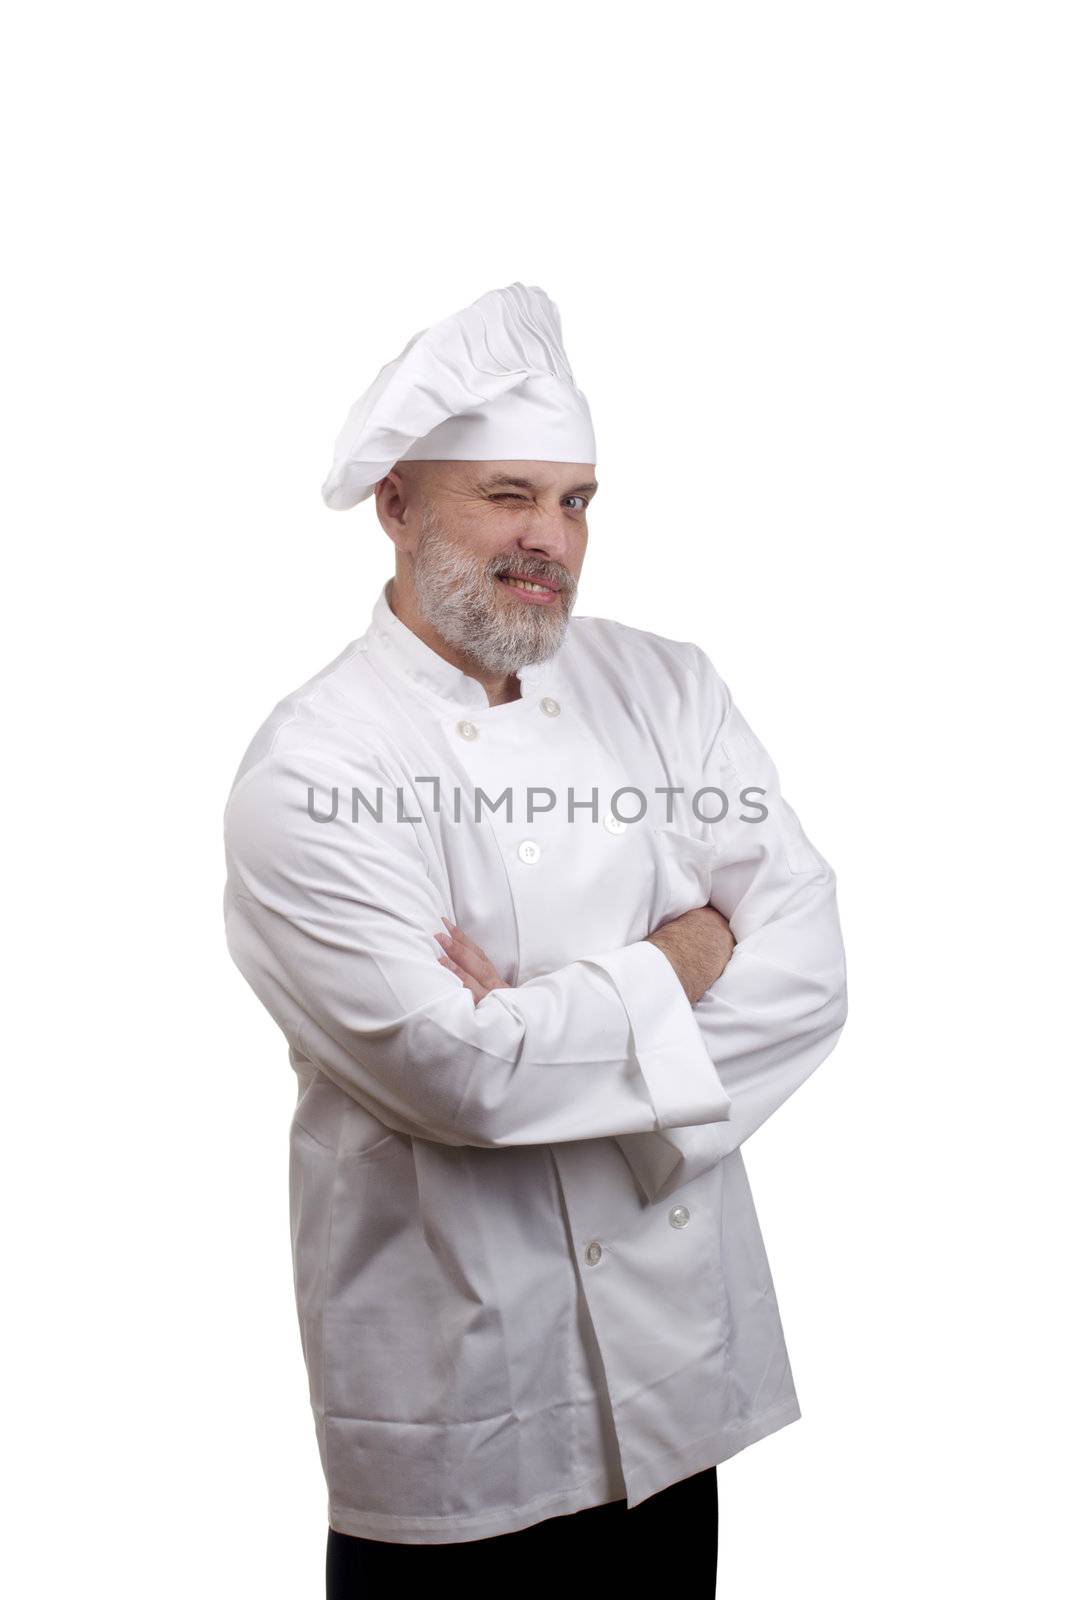 Portrait of a happy chef winking in a chef's hat and uniform isolated on a white background.